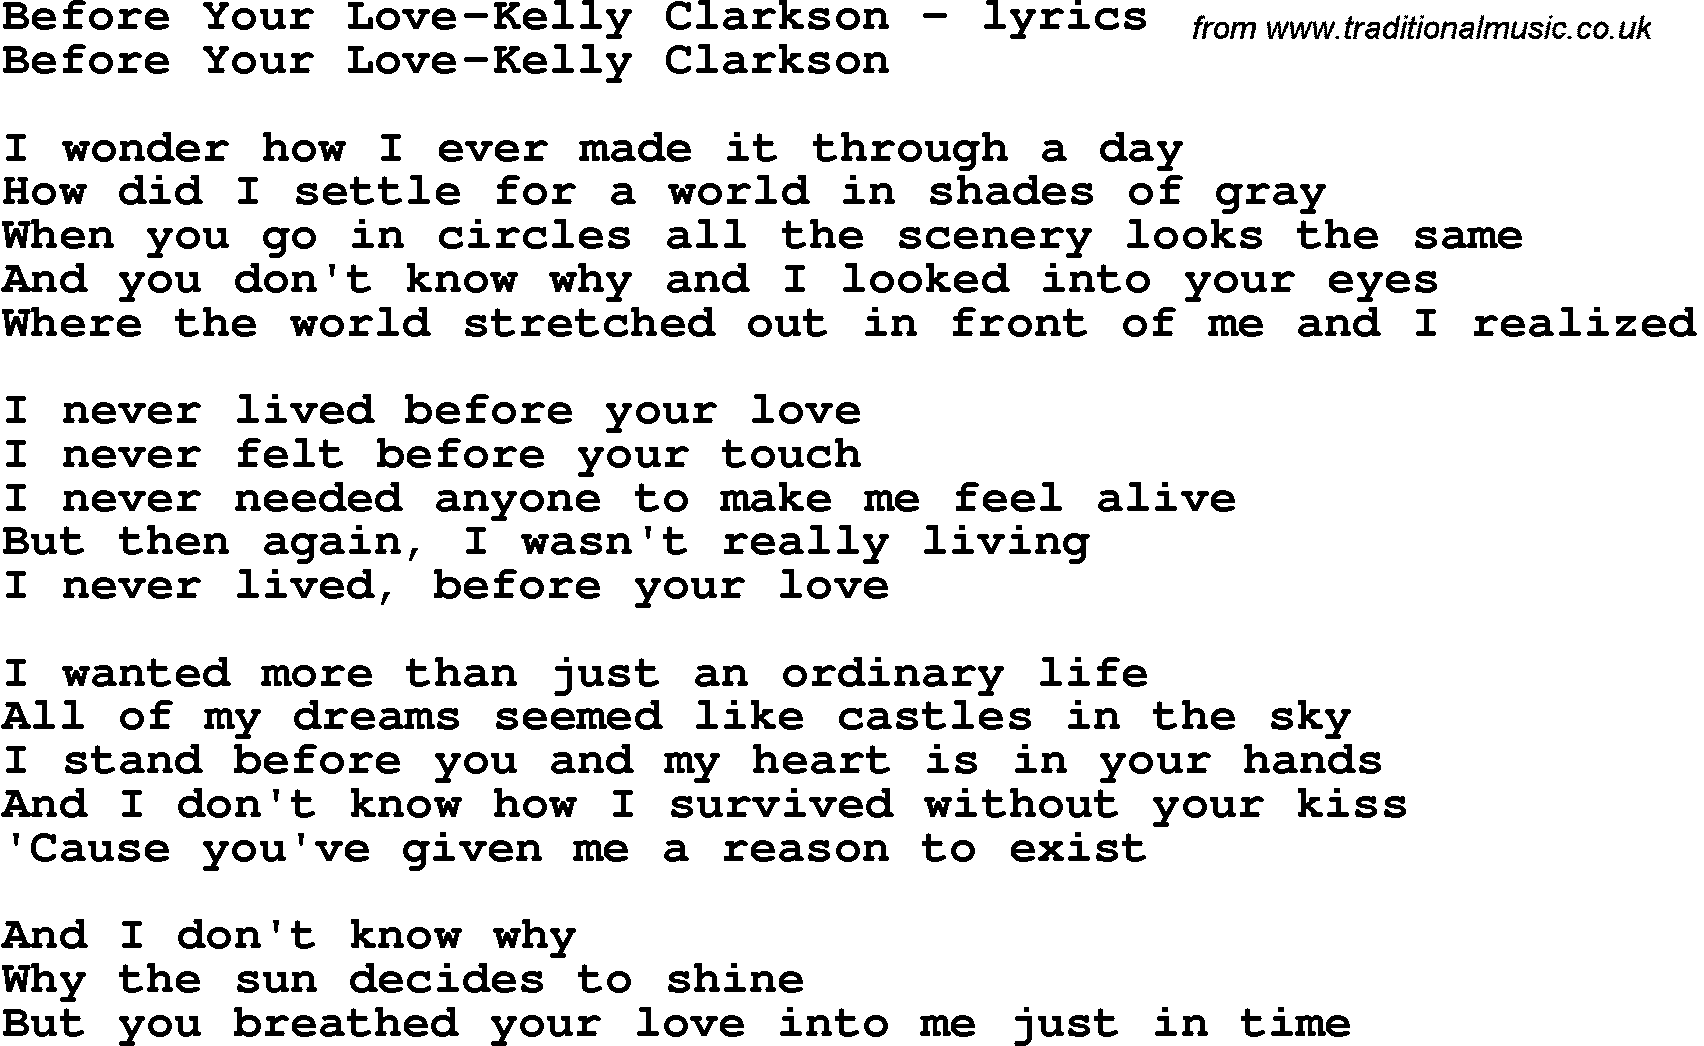 Love Song Lyrics for: Before Your Love-Kelly Clarkson